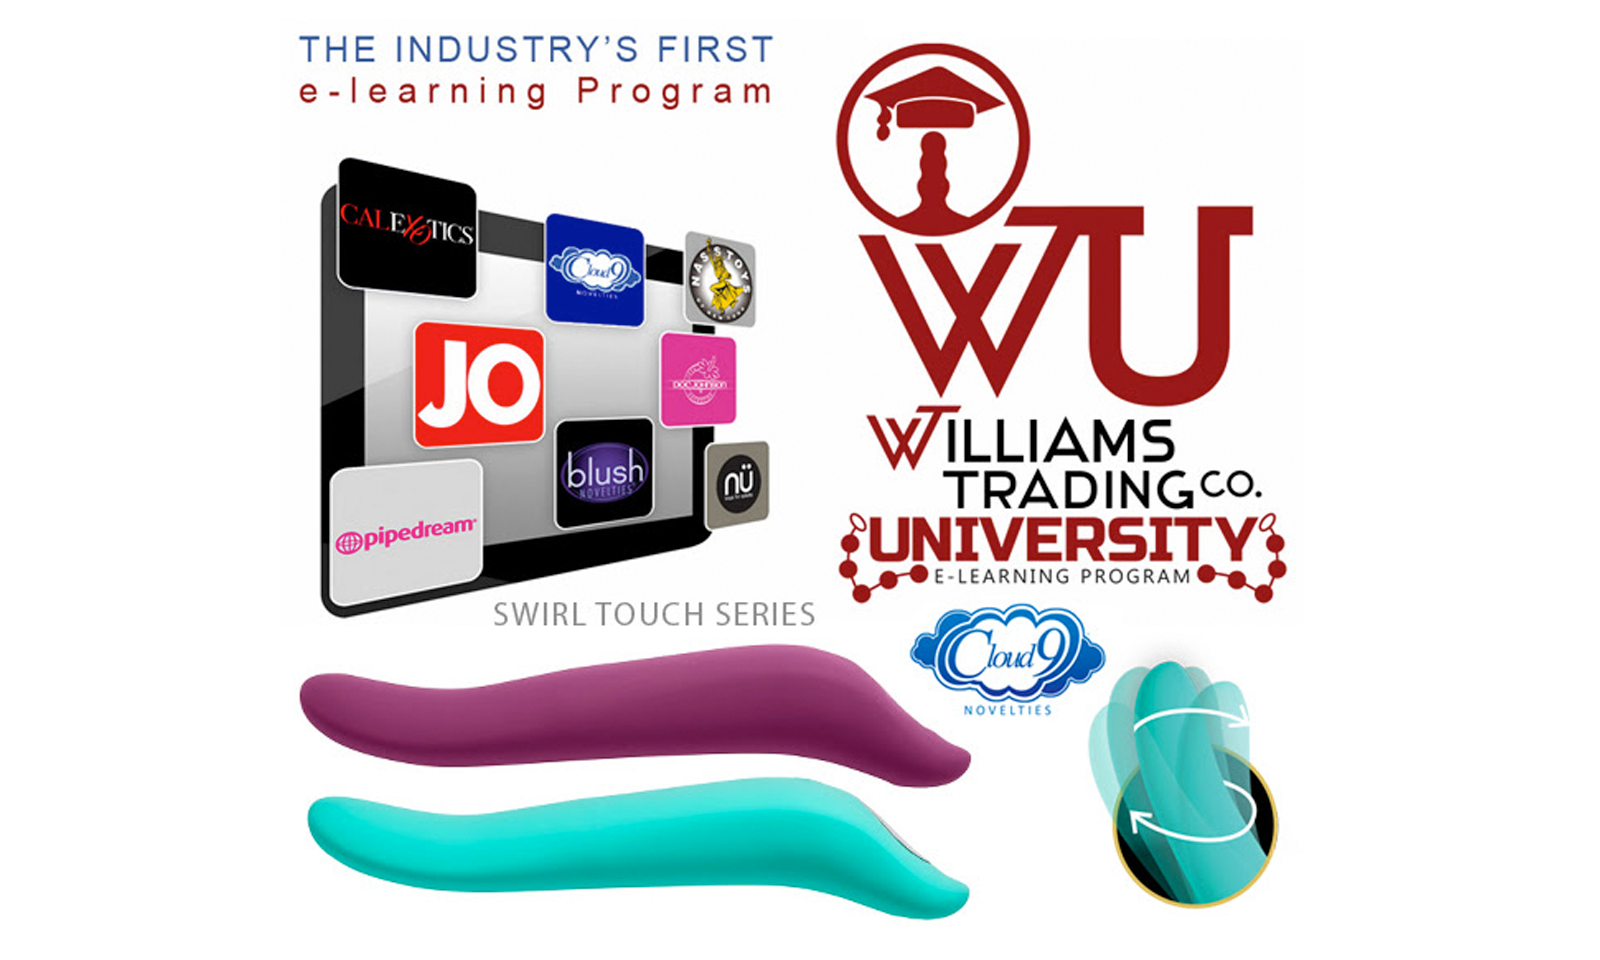 WTU Has New Course on Cloud 9’s Swirl Touch Series